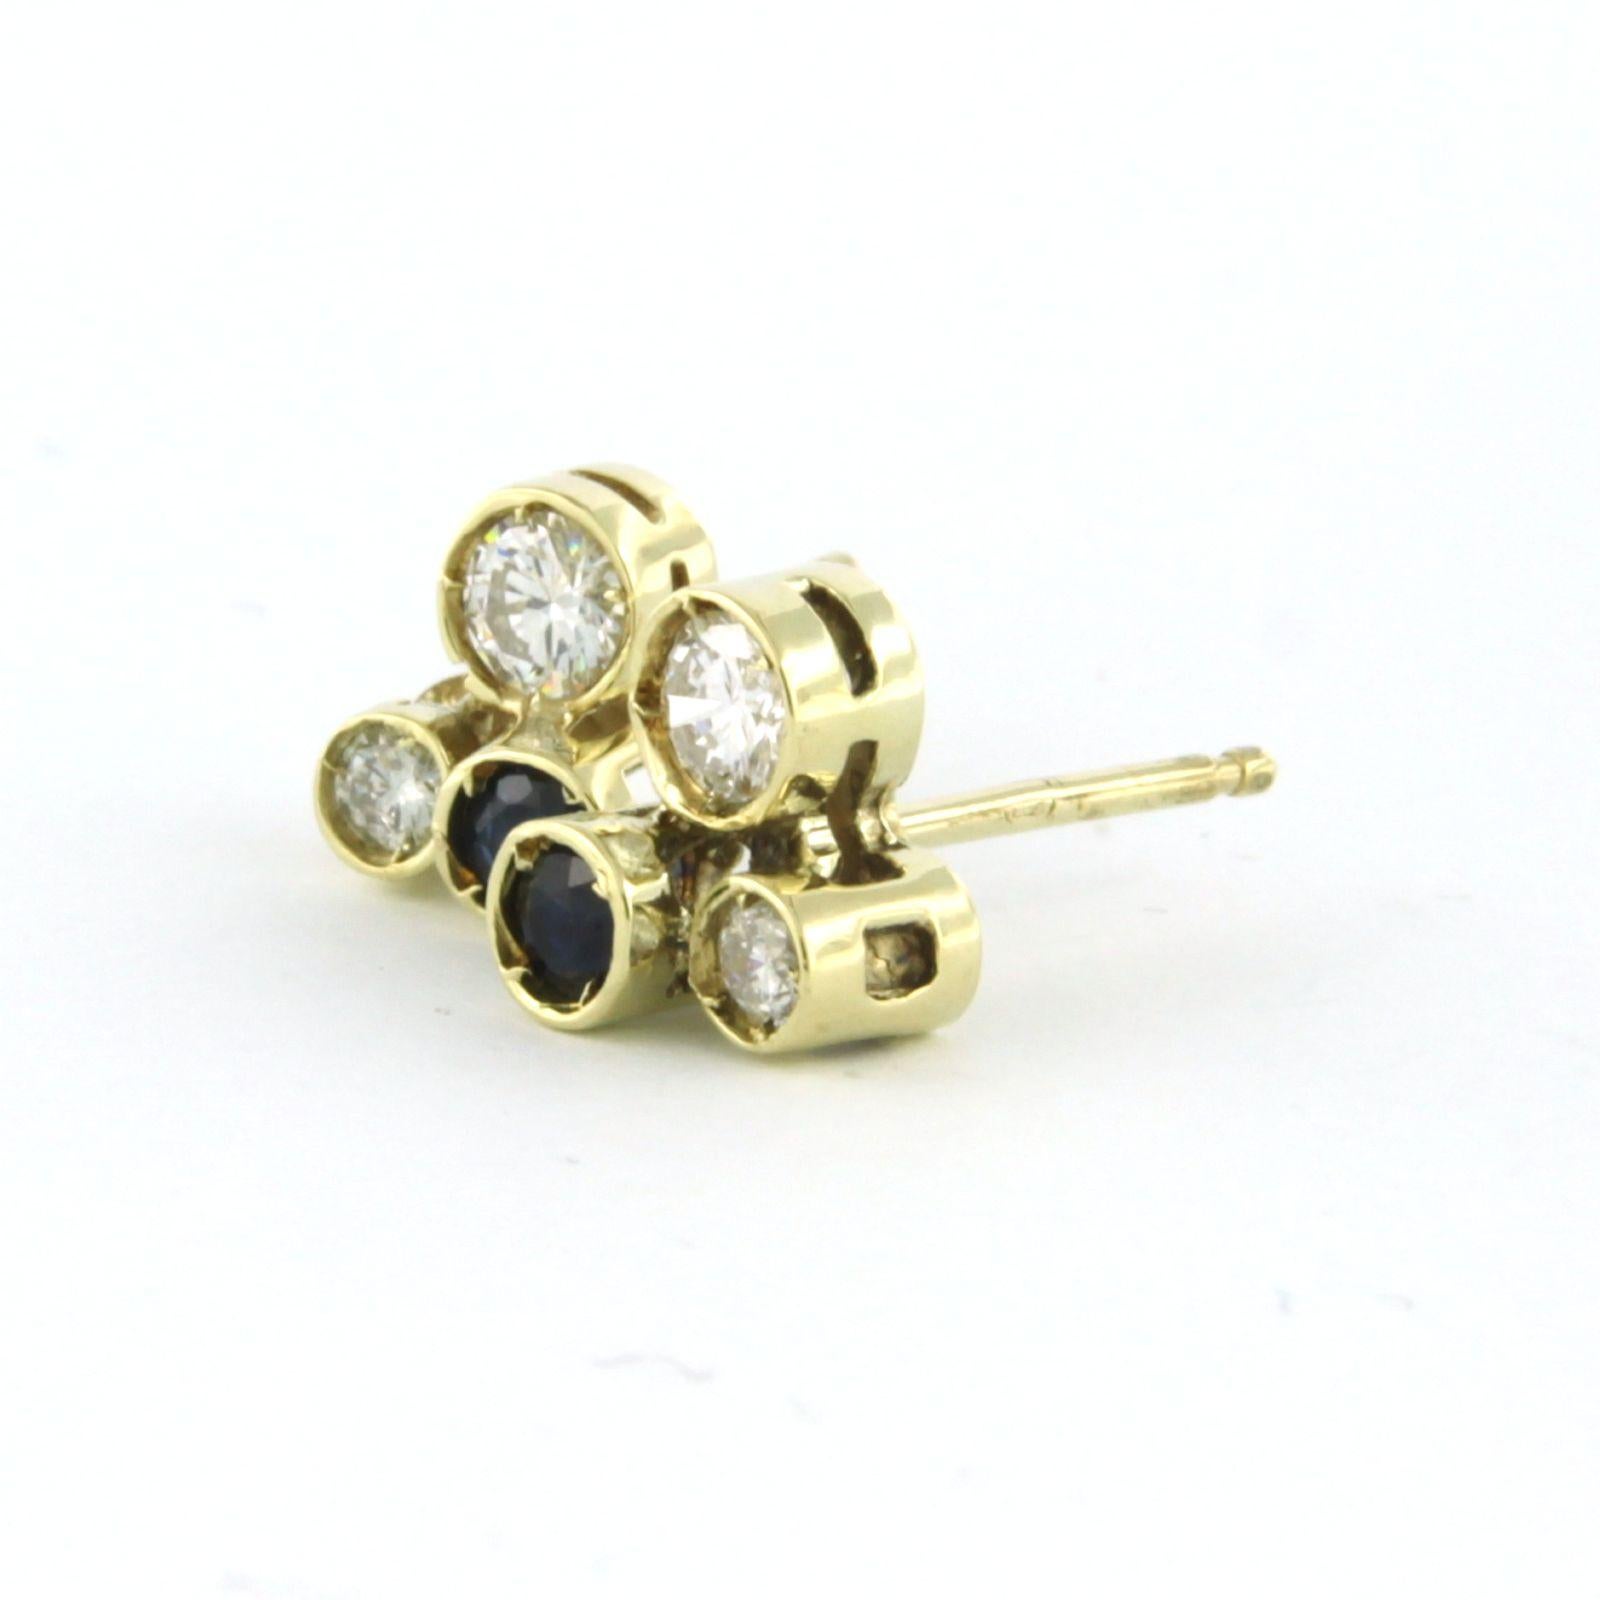 Women's Earrings stud set with sapphire and diamonds 14k yellow gold